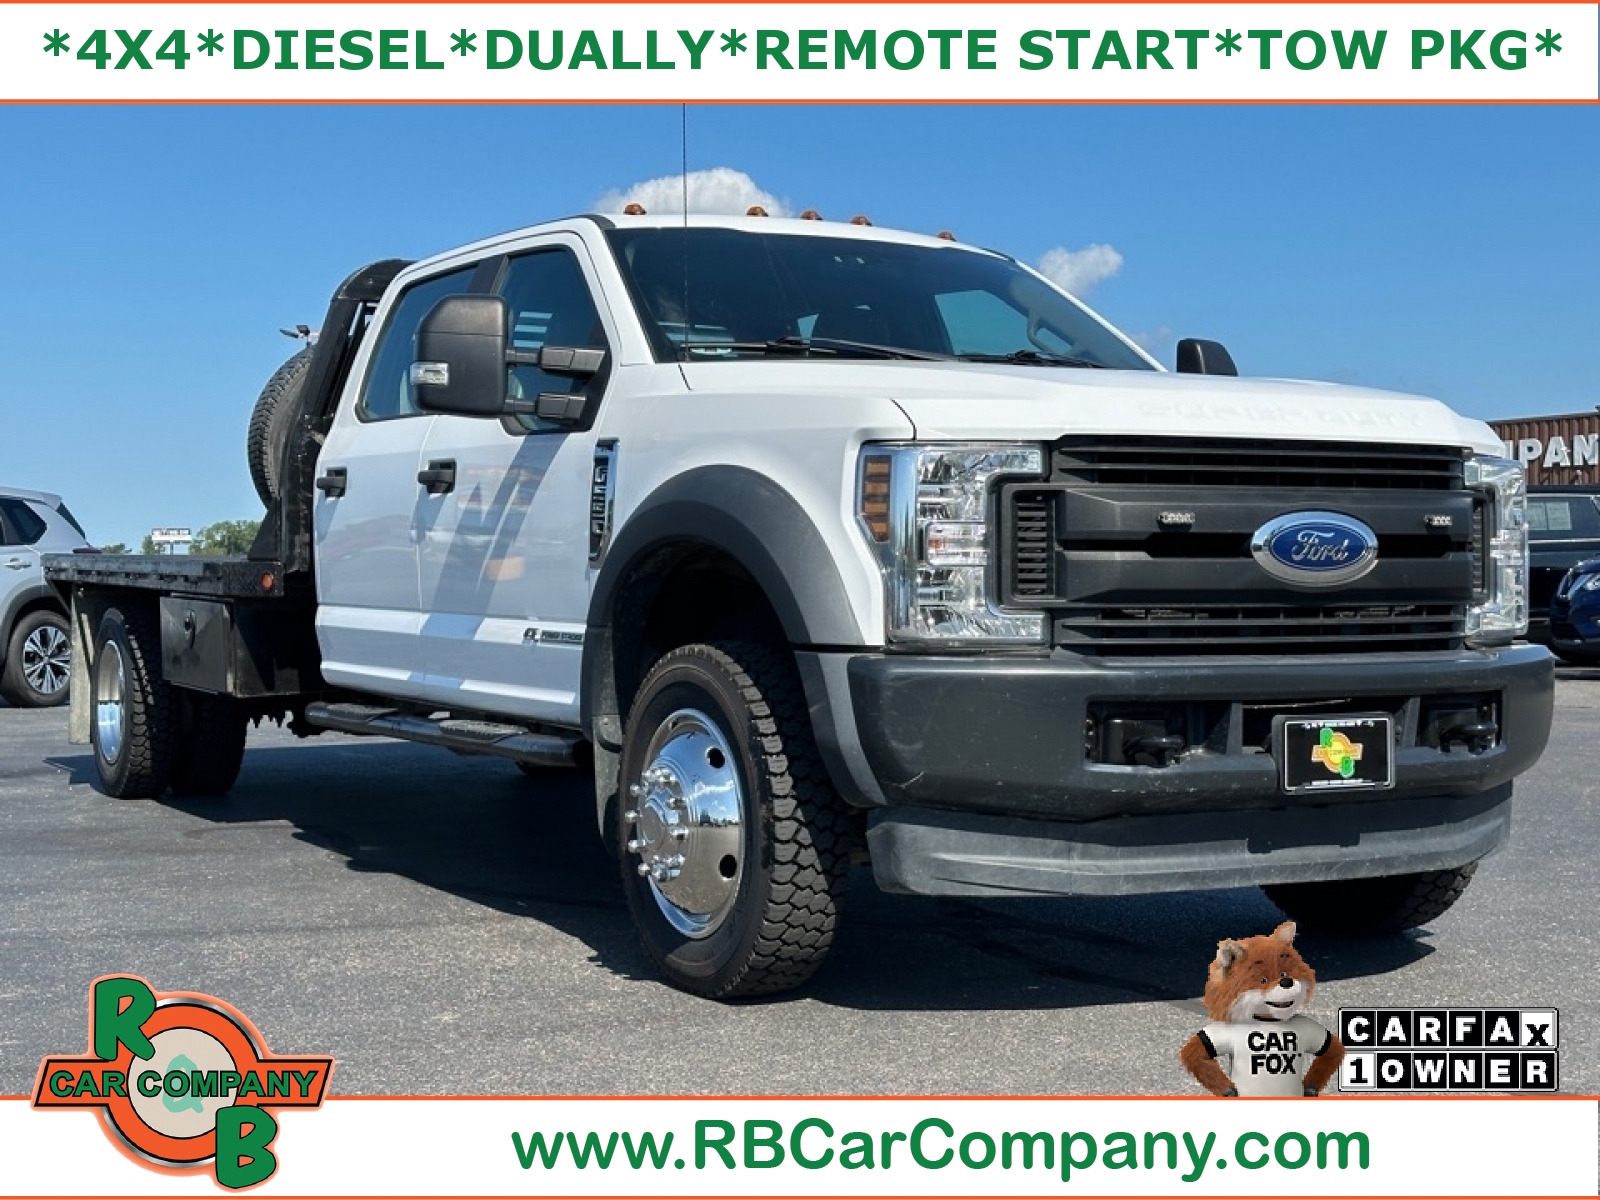 2014 Ford Super Duty F-550 DRW Chassis C XL, 35445, Photo 1